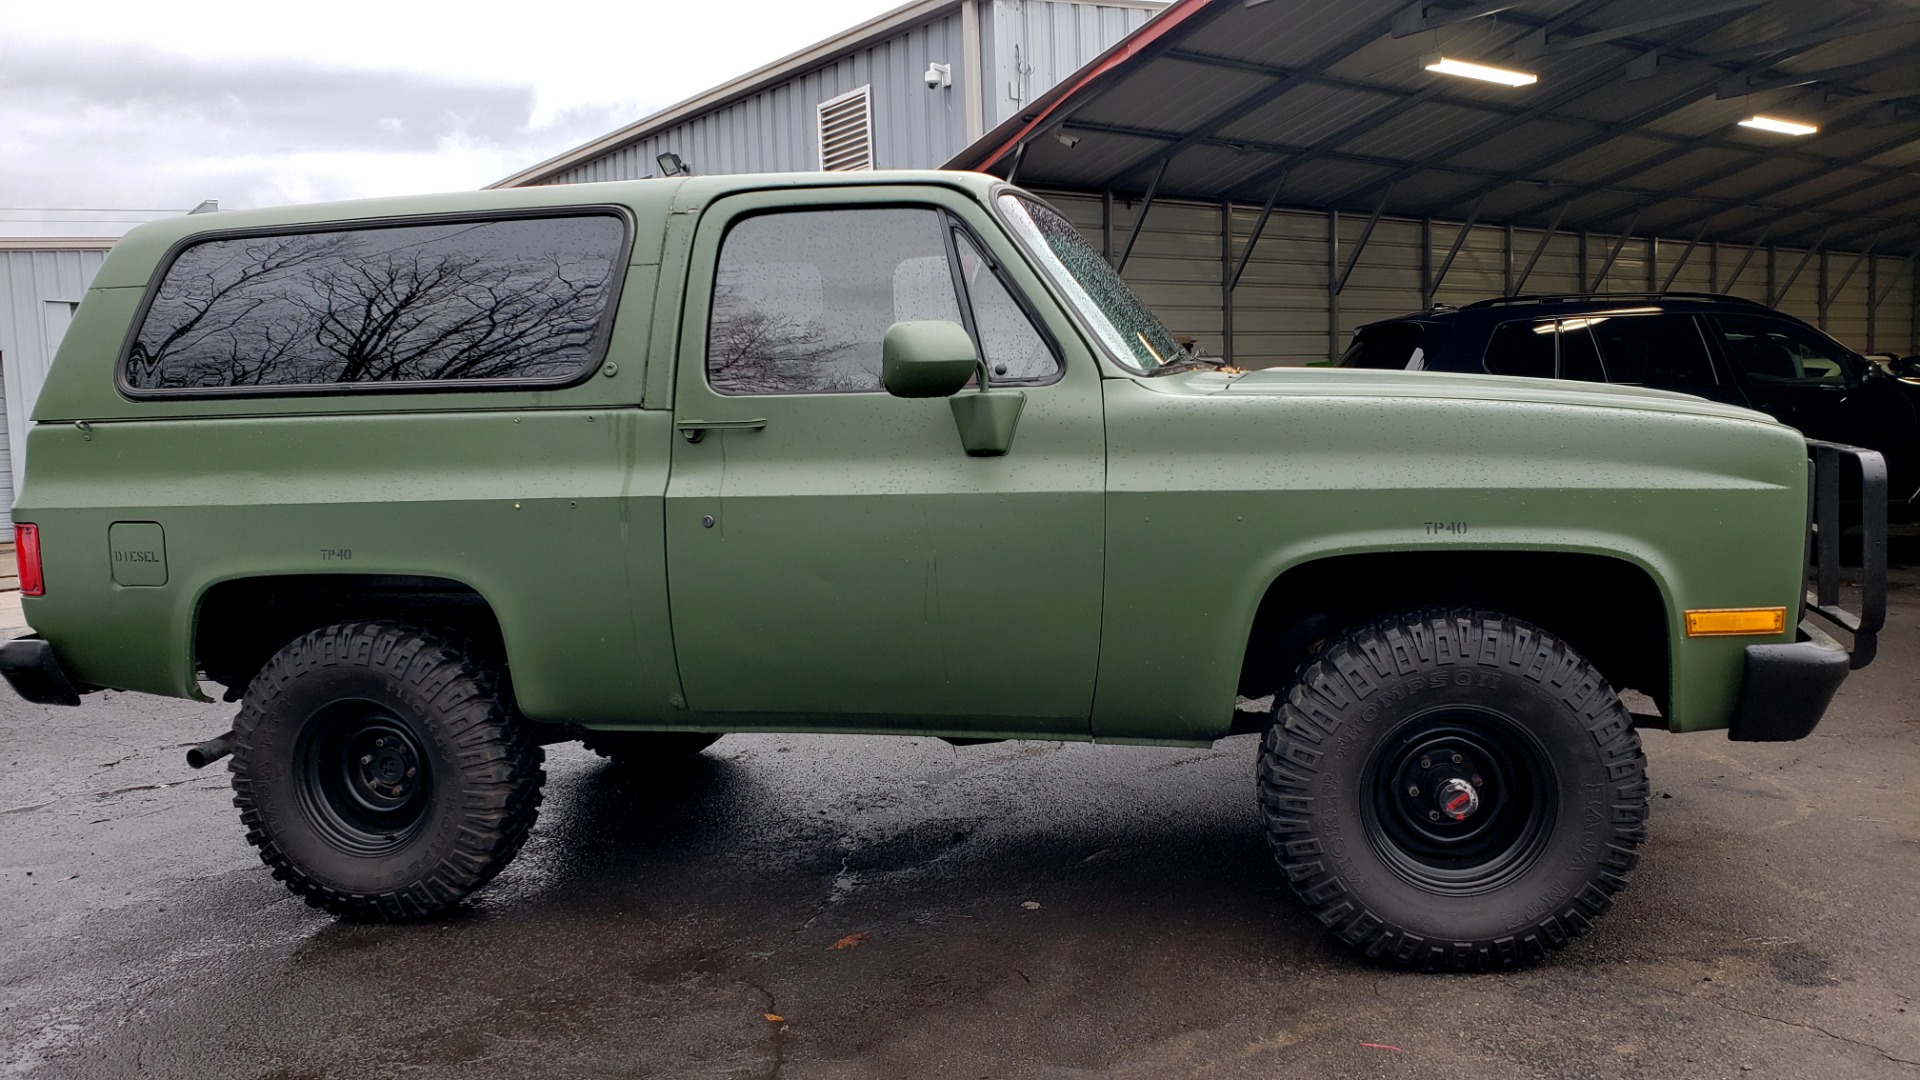 Used 1985 Chevrolet BLAZER D10 MILITARY SUV / 4X4 / 6.2L DIESEL V8 / VINTAGE AIR for sale Sold at Formula Imports in Charlotte NC 28227 18